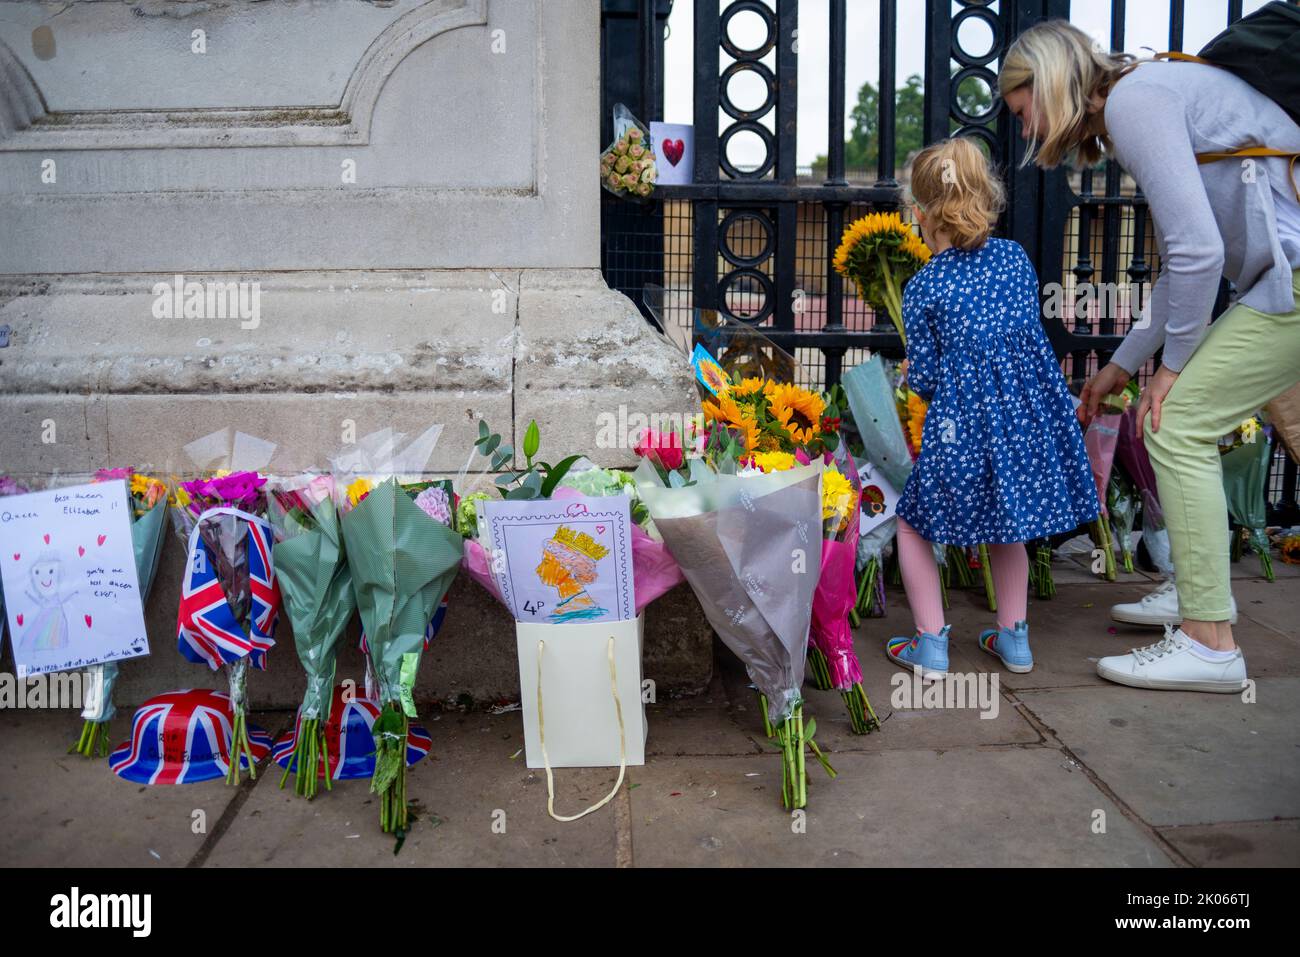 Westminster, London, UK. 10th Sep, 2022. Following the death of the Queen on Thursday members of the public have gathered at Buckingham Palace to honour her passing and to leave flowers, gifts and messages. Young girl placing flowers Stock Photo